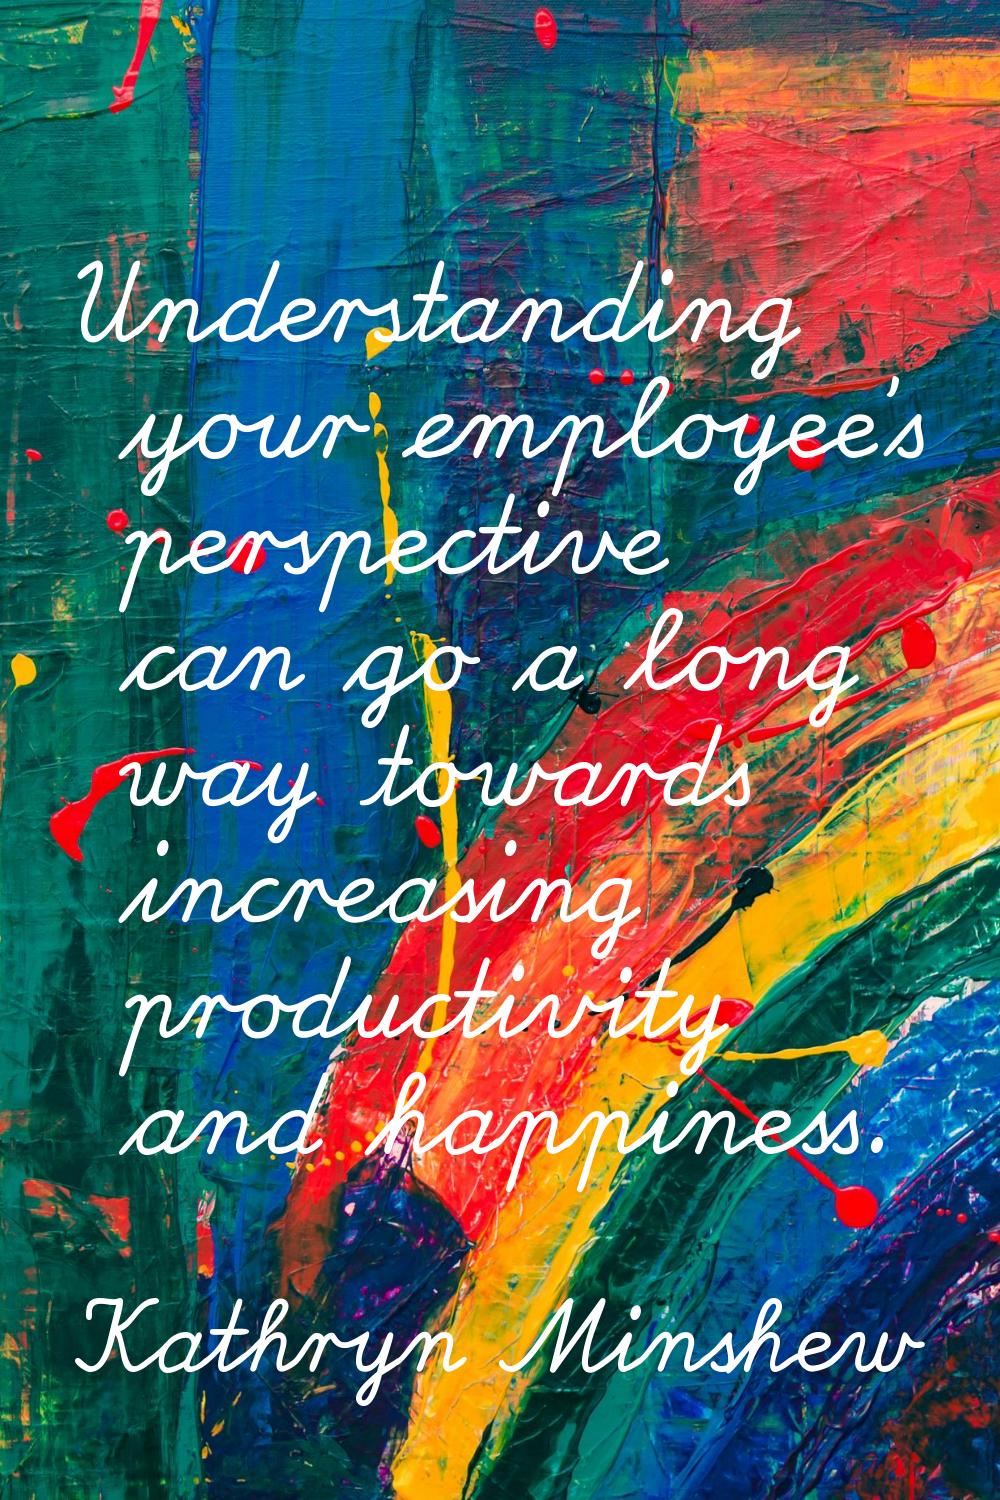 Understanding your employee's perspective can go a long way towards increasing productivity and hap